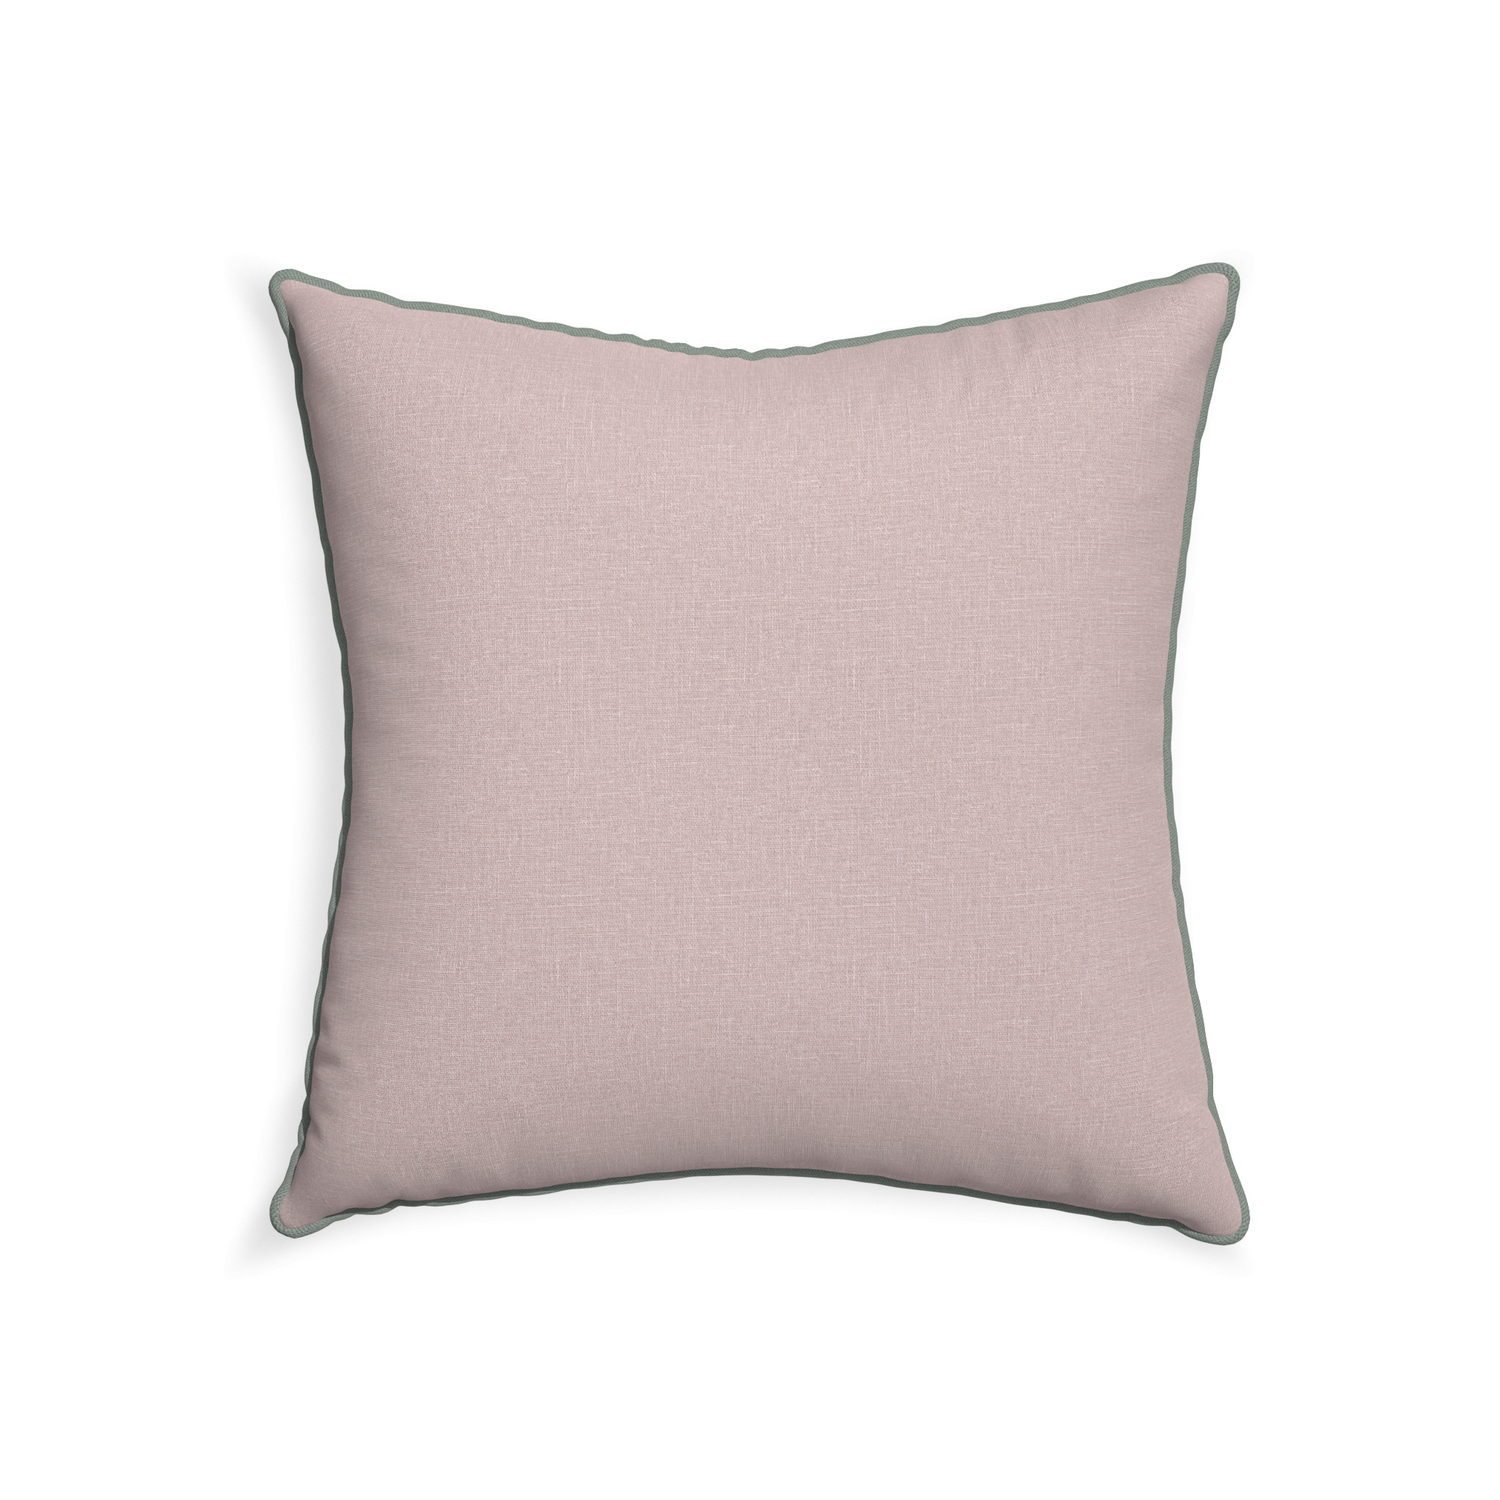 22-square orchid custom mauve pinkpillow with sage piping on white background